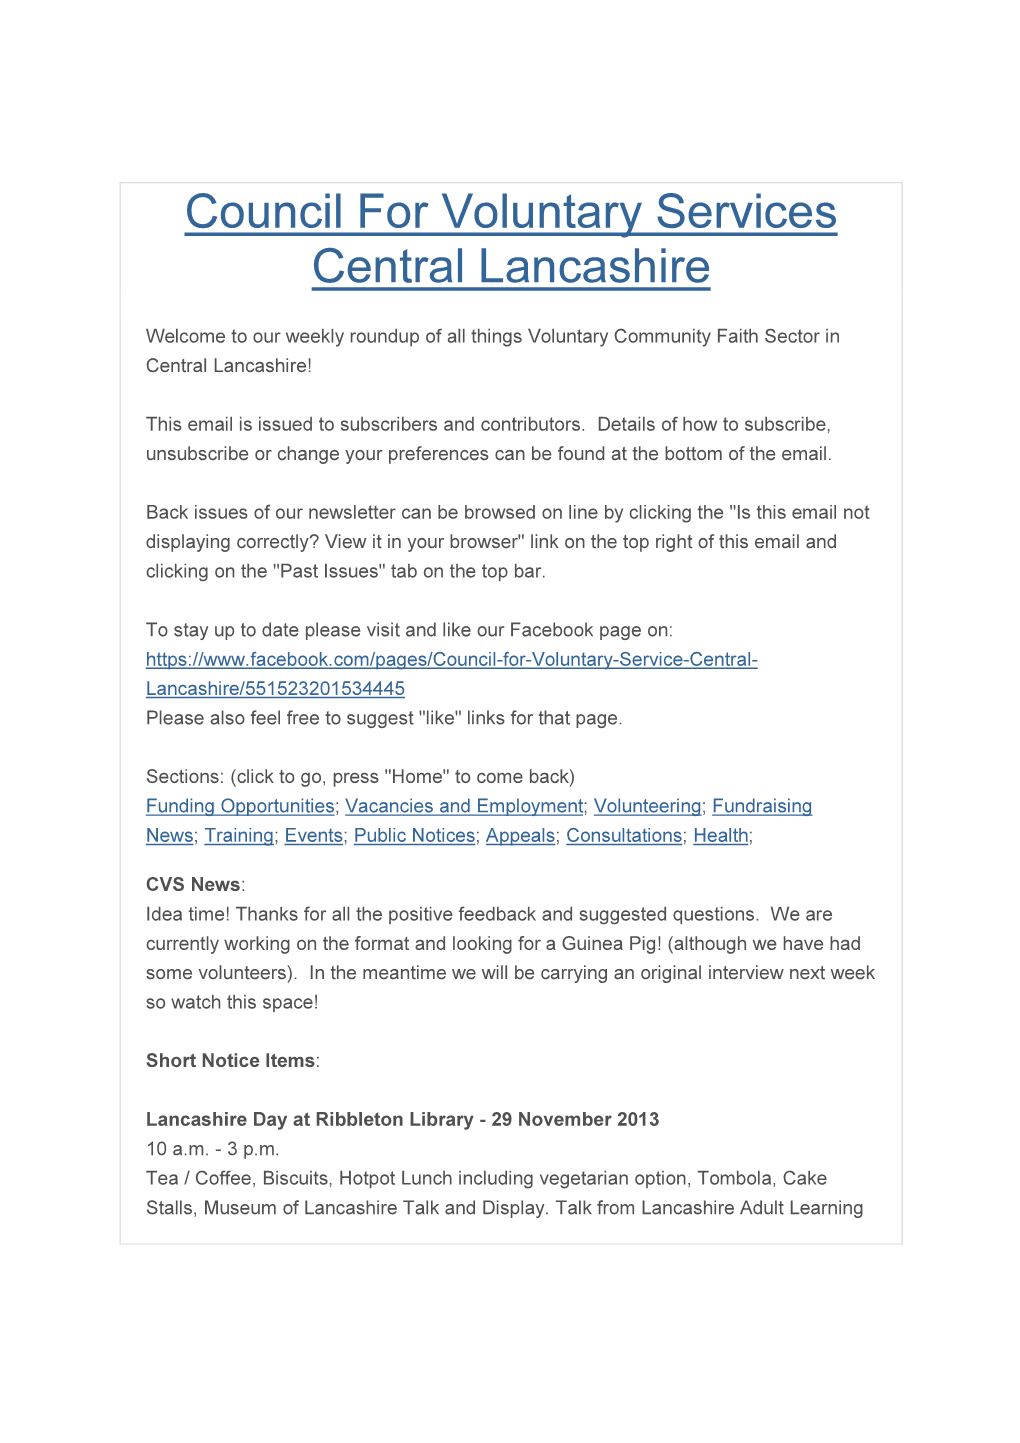 Council for Voluntary Services Central Lancashire, All Rights Reserved